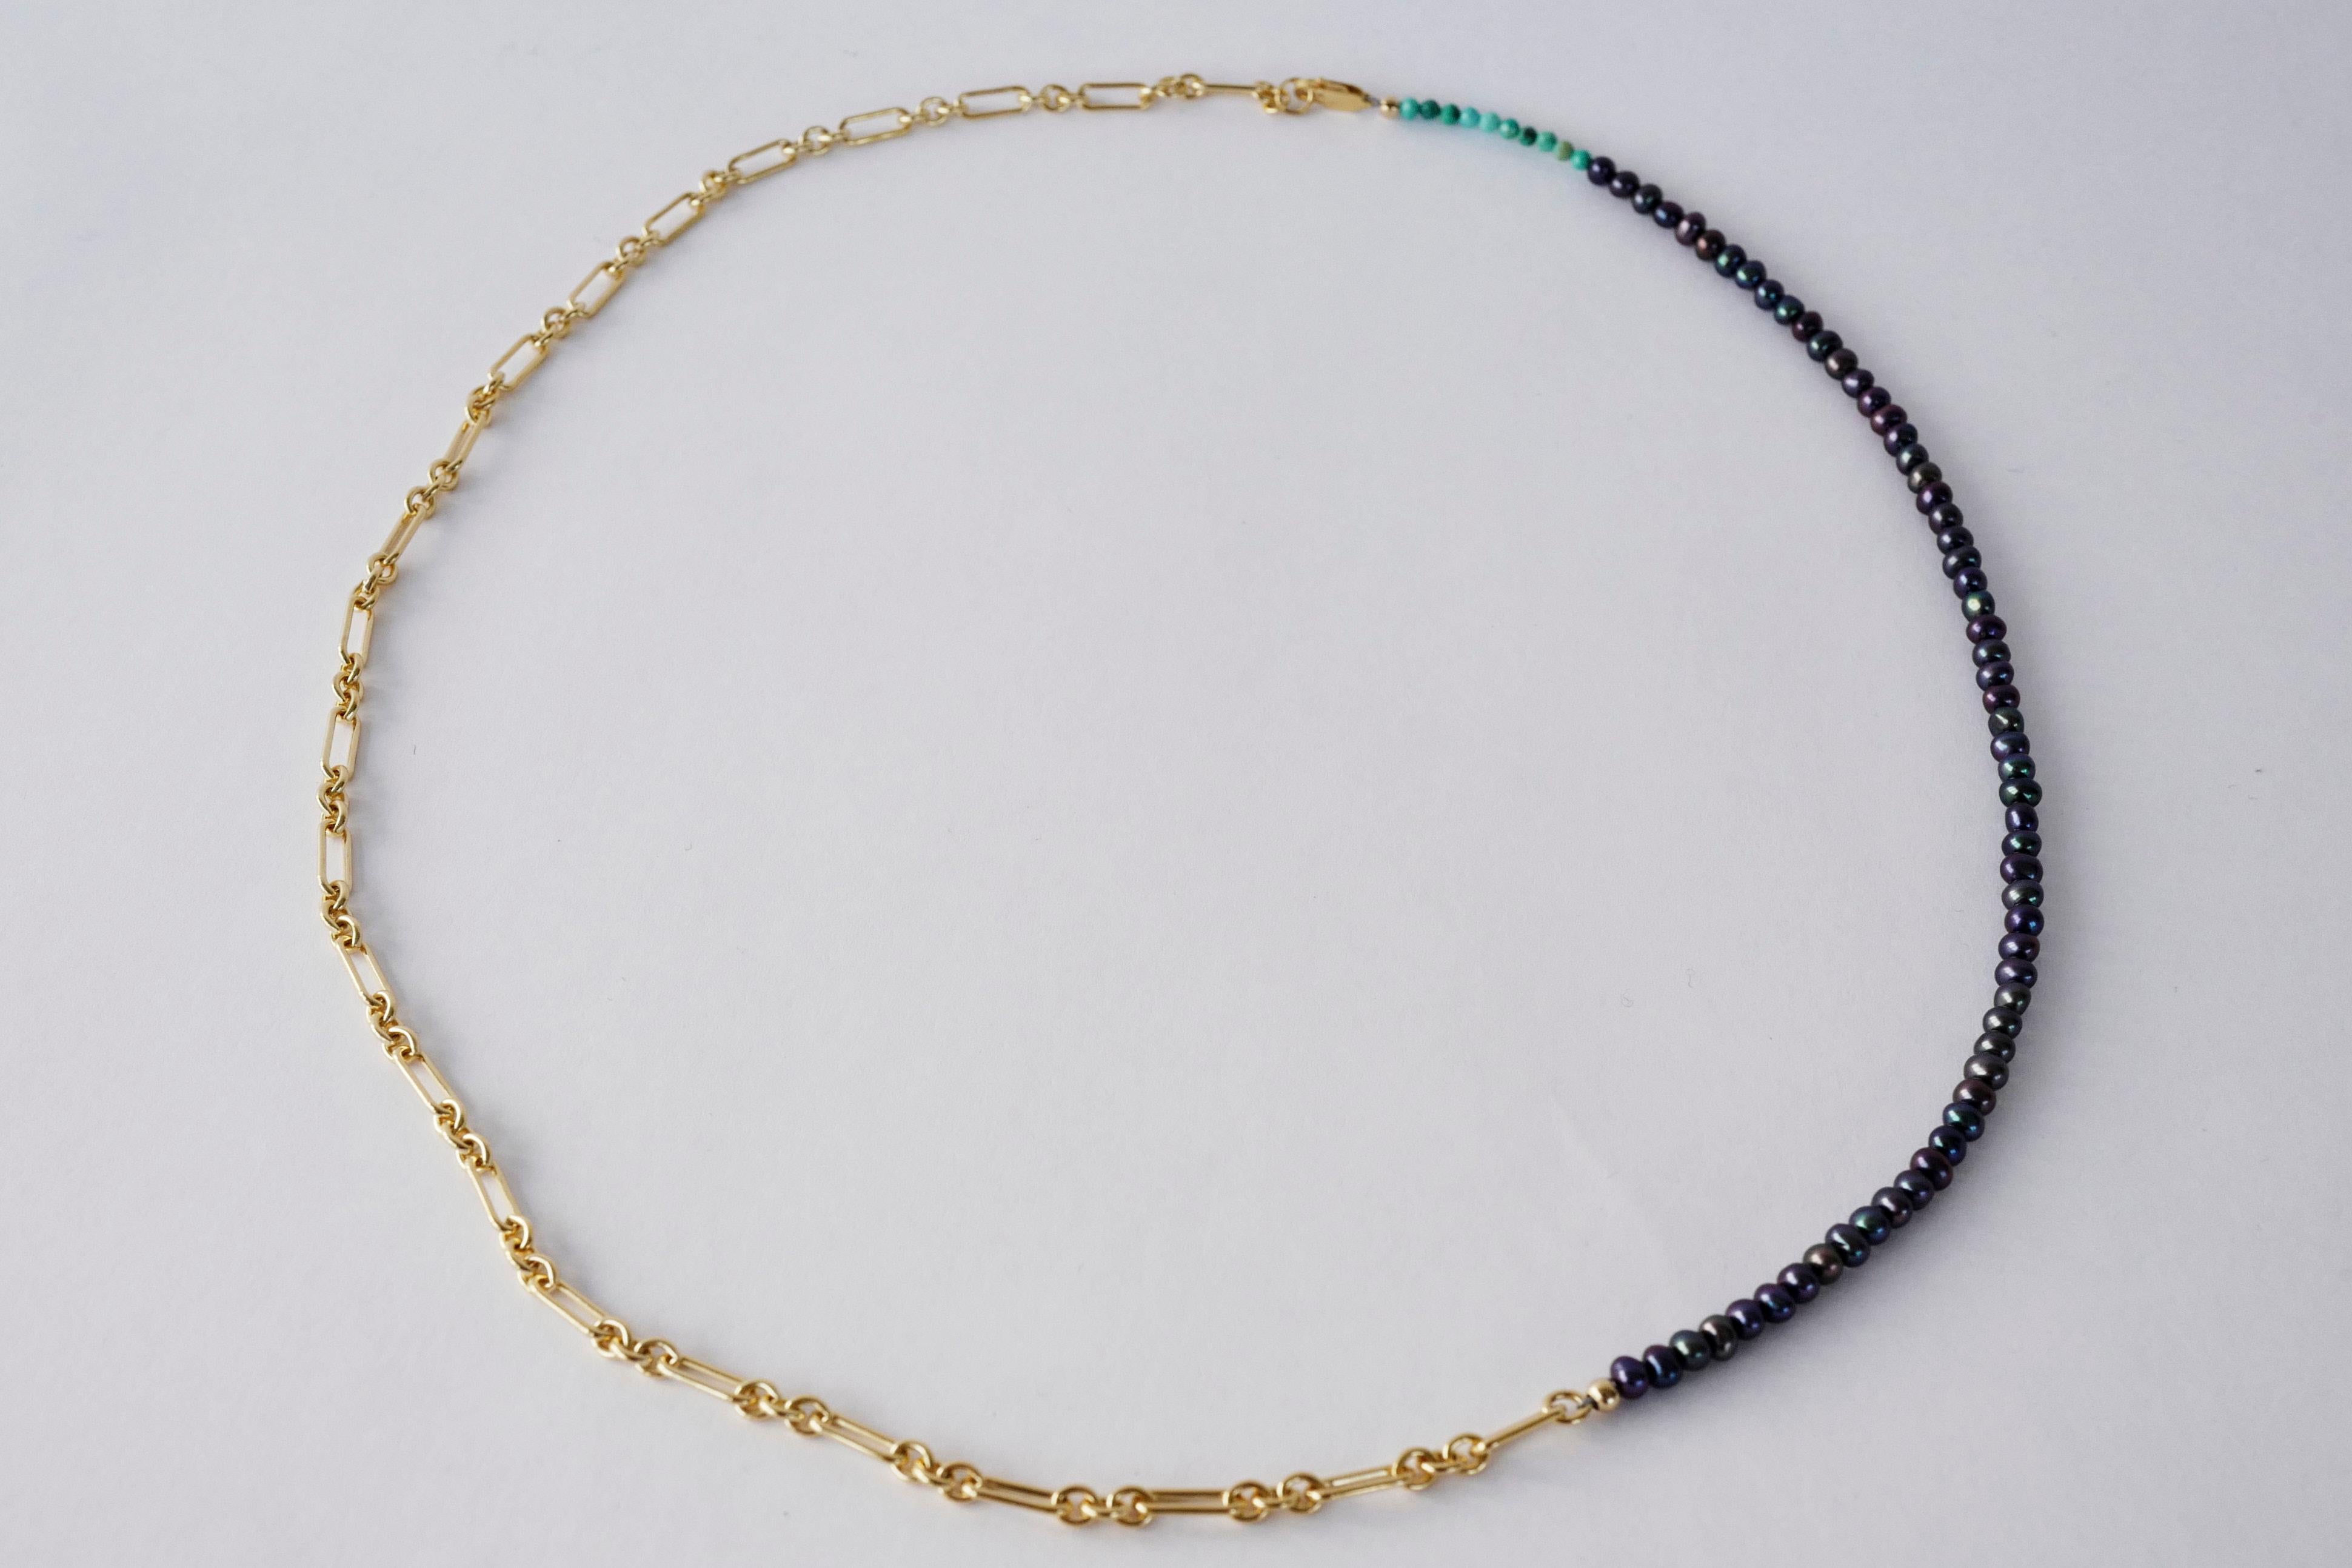 Romantic Black Pearl Turquoise Gold Filled Chain Beaded Choker Necklace J Dauphin For Sale